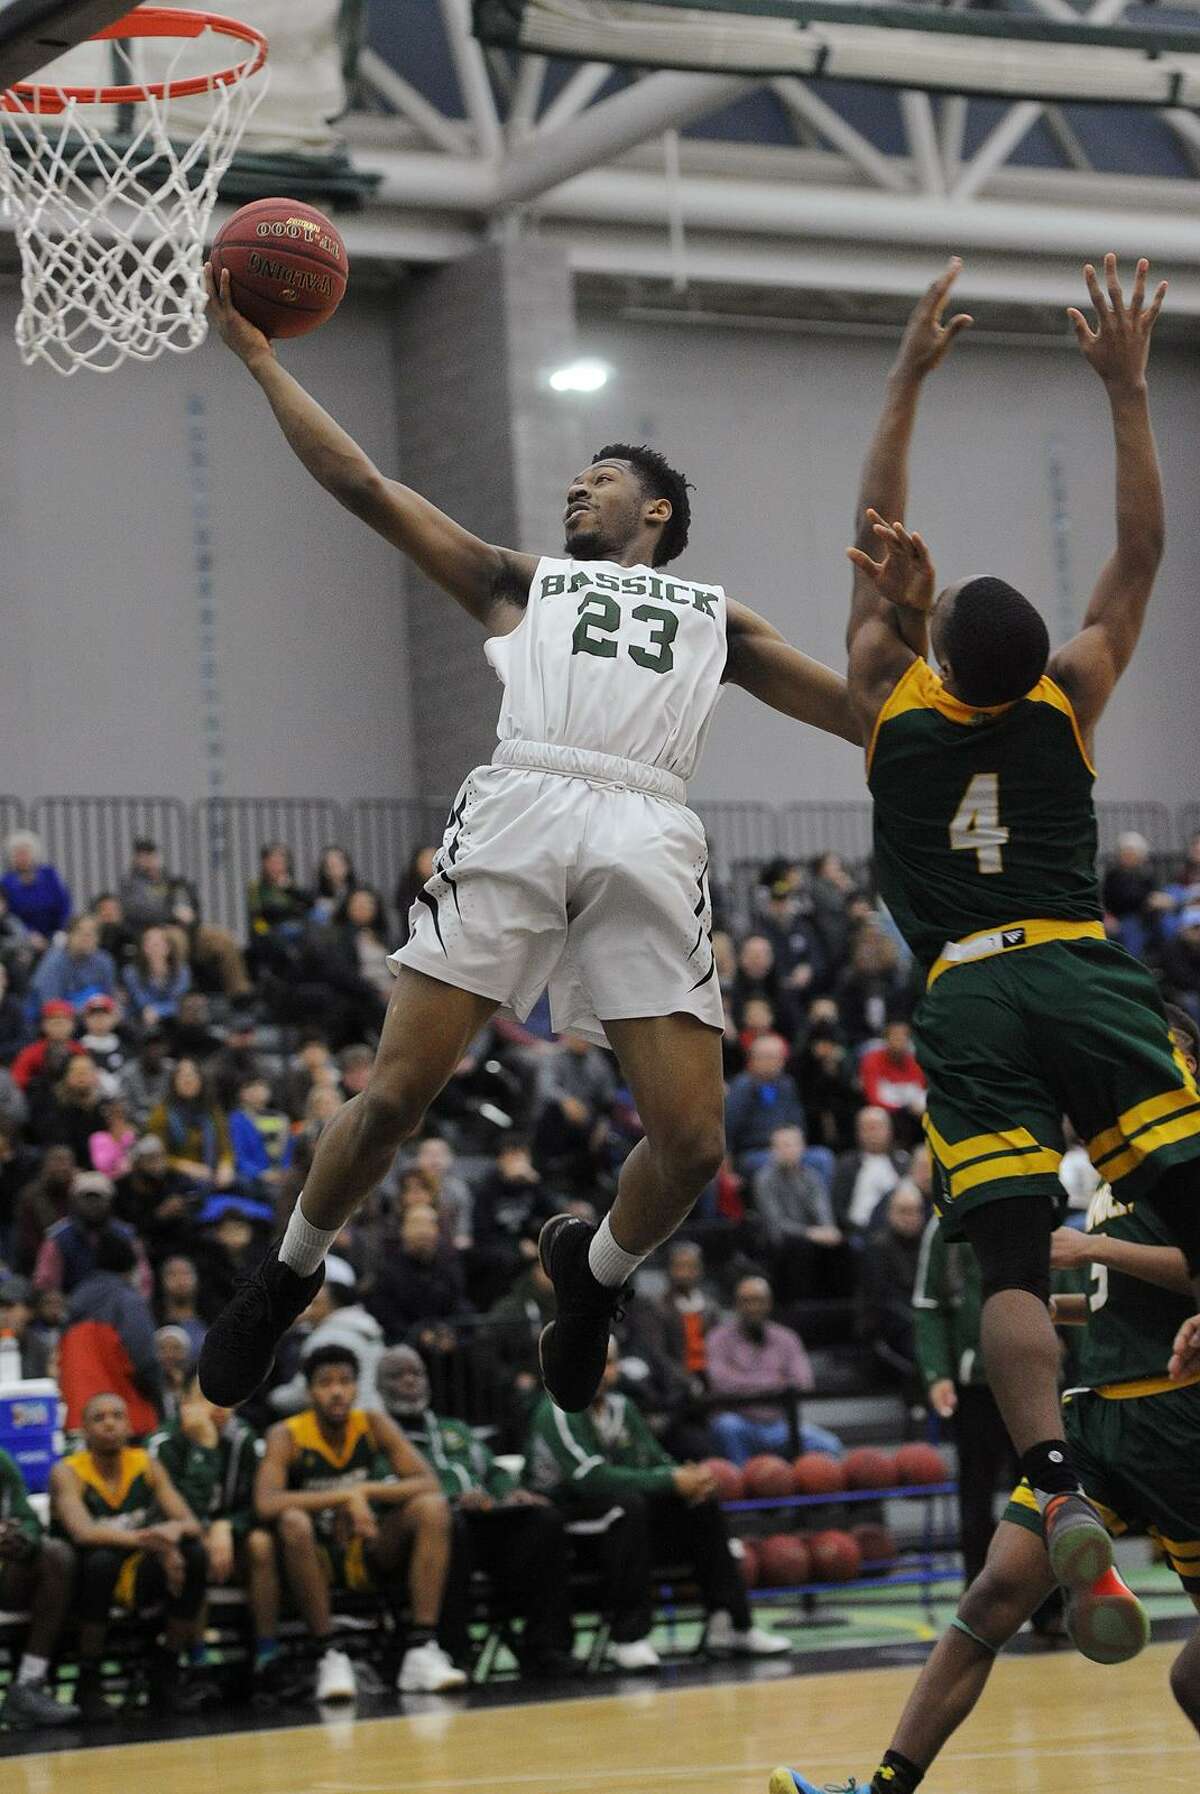 Bassick’s Jordan Gallimore drives to the basket ahead of Hamden’s Douglas Daniels during their Division 1 quarterfinal game on Monday night at the Floyd Little Athletic Center in New Haven.